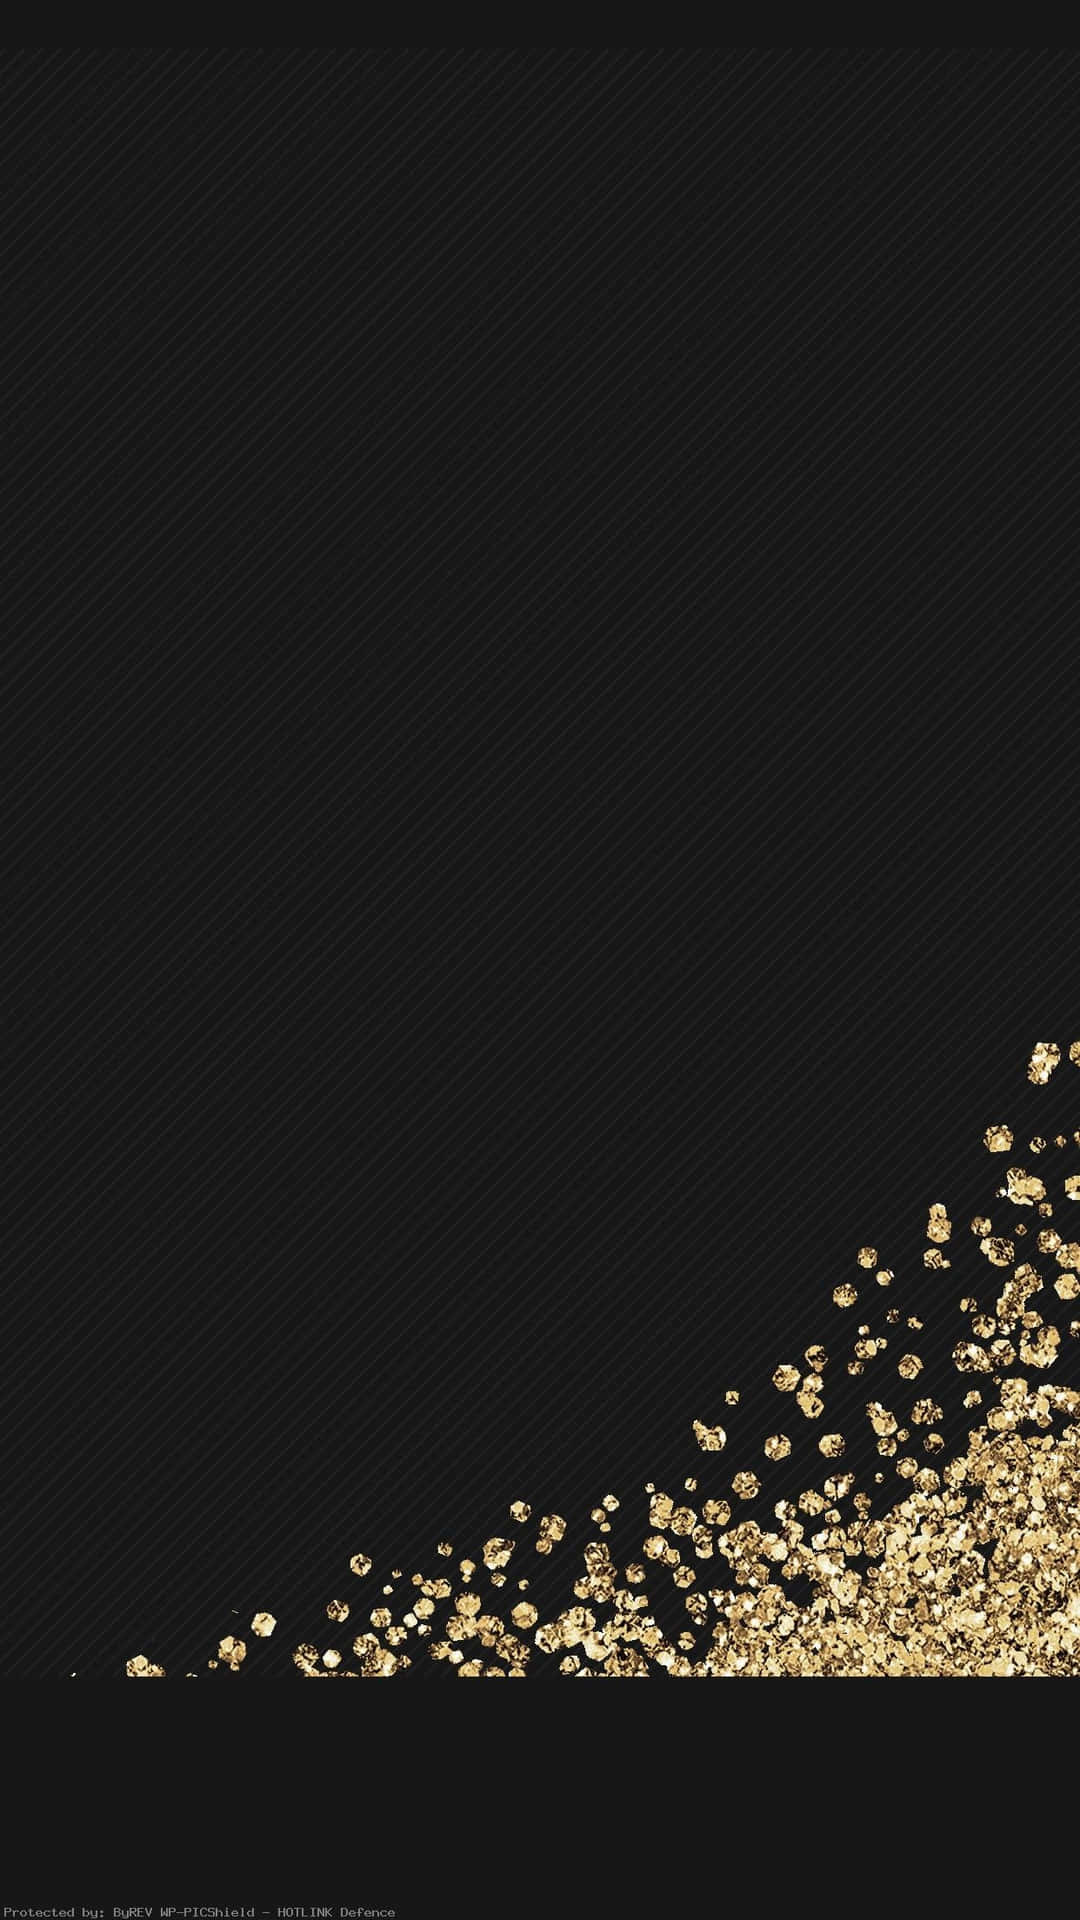 Gold Flakes Falling On A Black Background Background